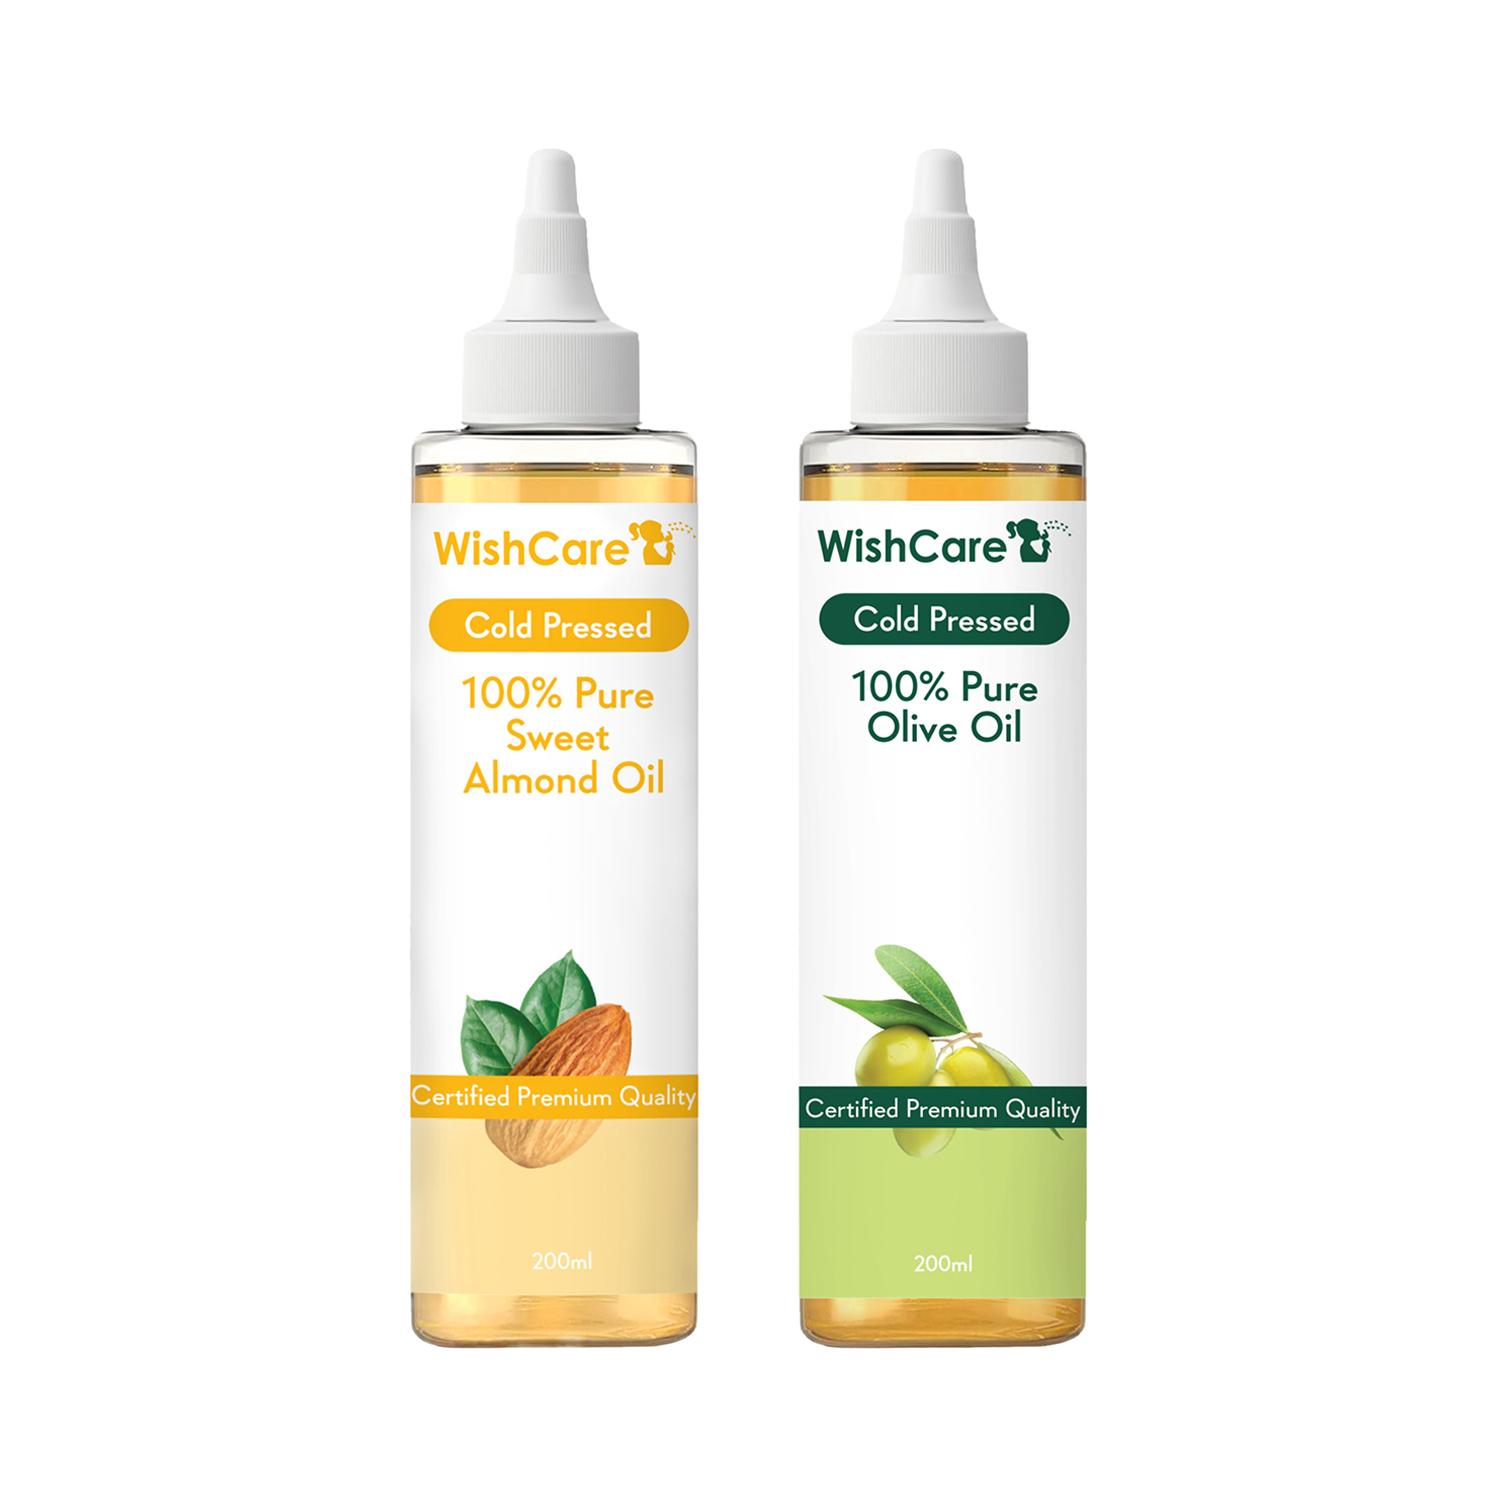 WishCare | WishCare 100% Pure Cold Pressed Olive Oil & Sweet Almond Oil Combo - (200 ml each)